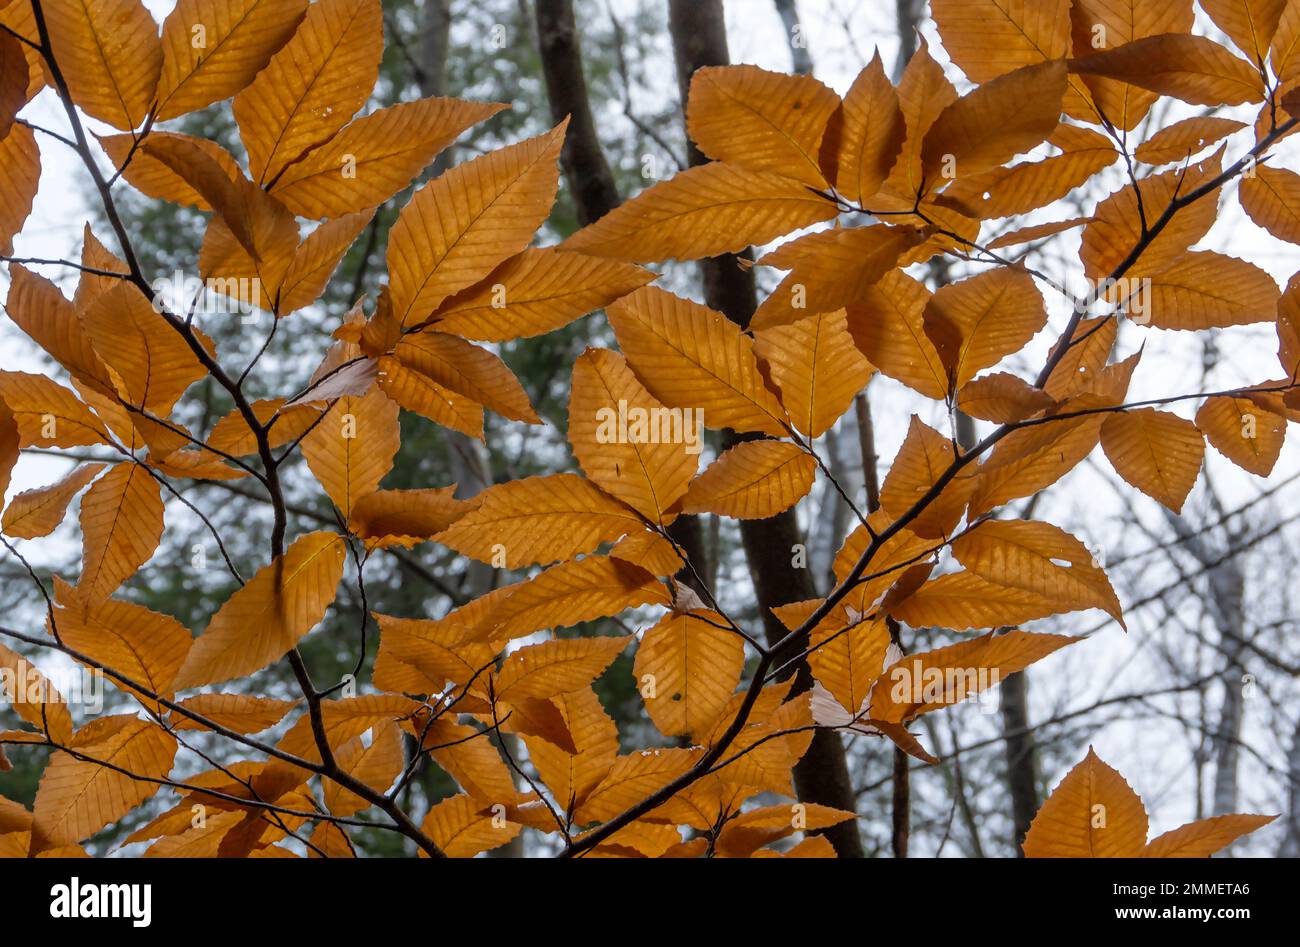 Leaves of American Beech Tree, Fagus grandifolia, in Autumn color. Stock Photo